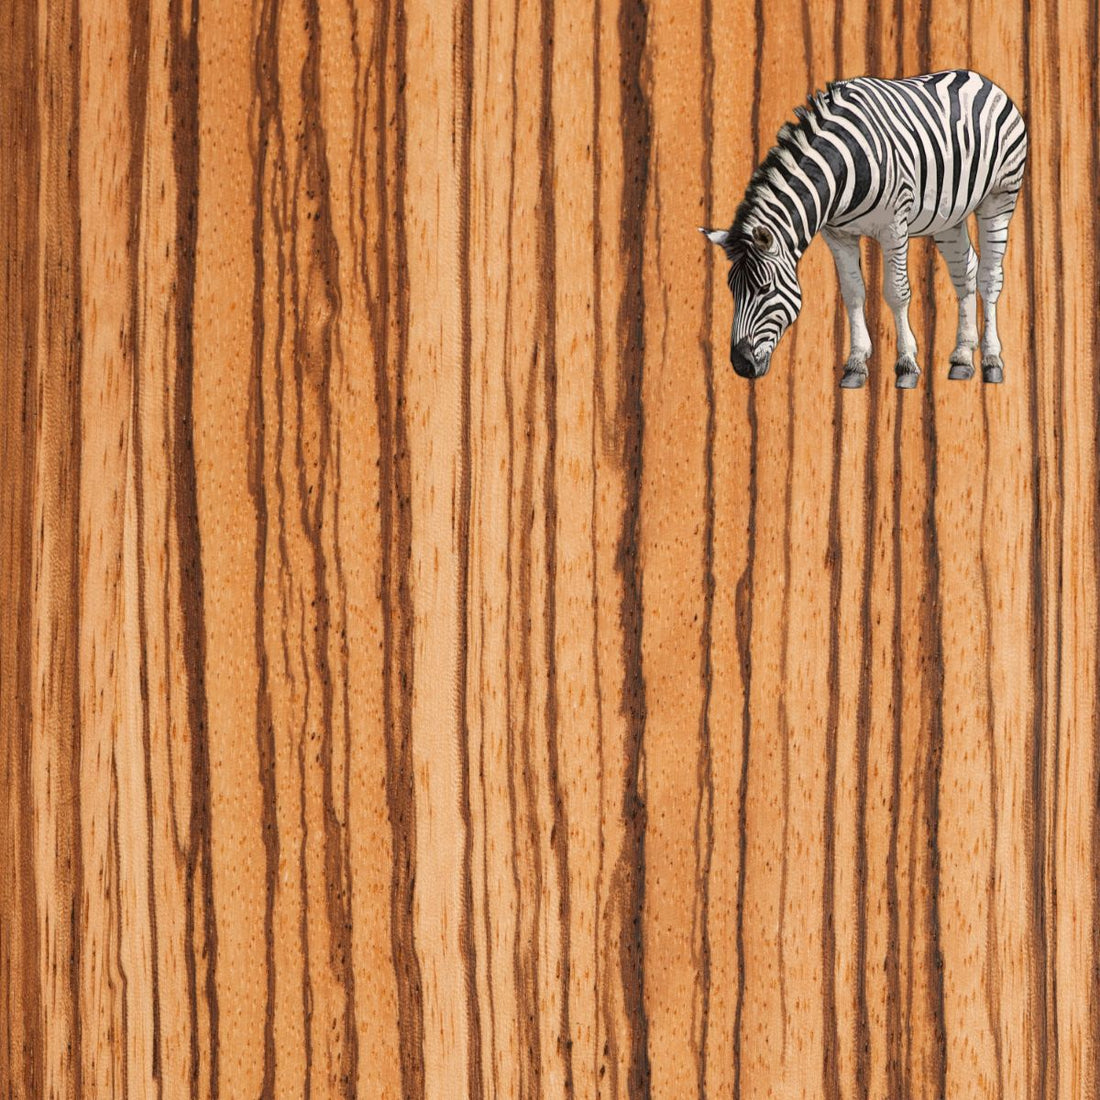 Is Zebra Wood A Good Wood For Cutting Boards or Butcher Blocks?